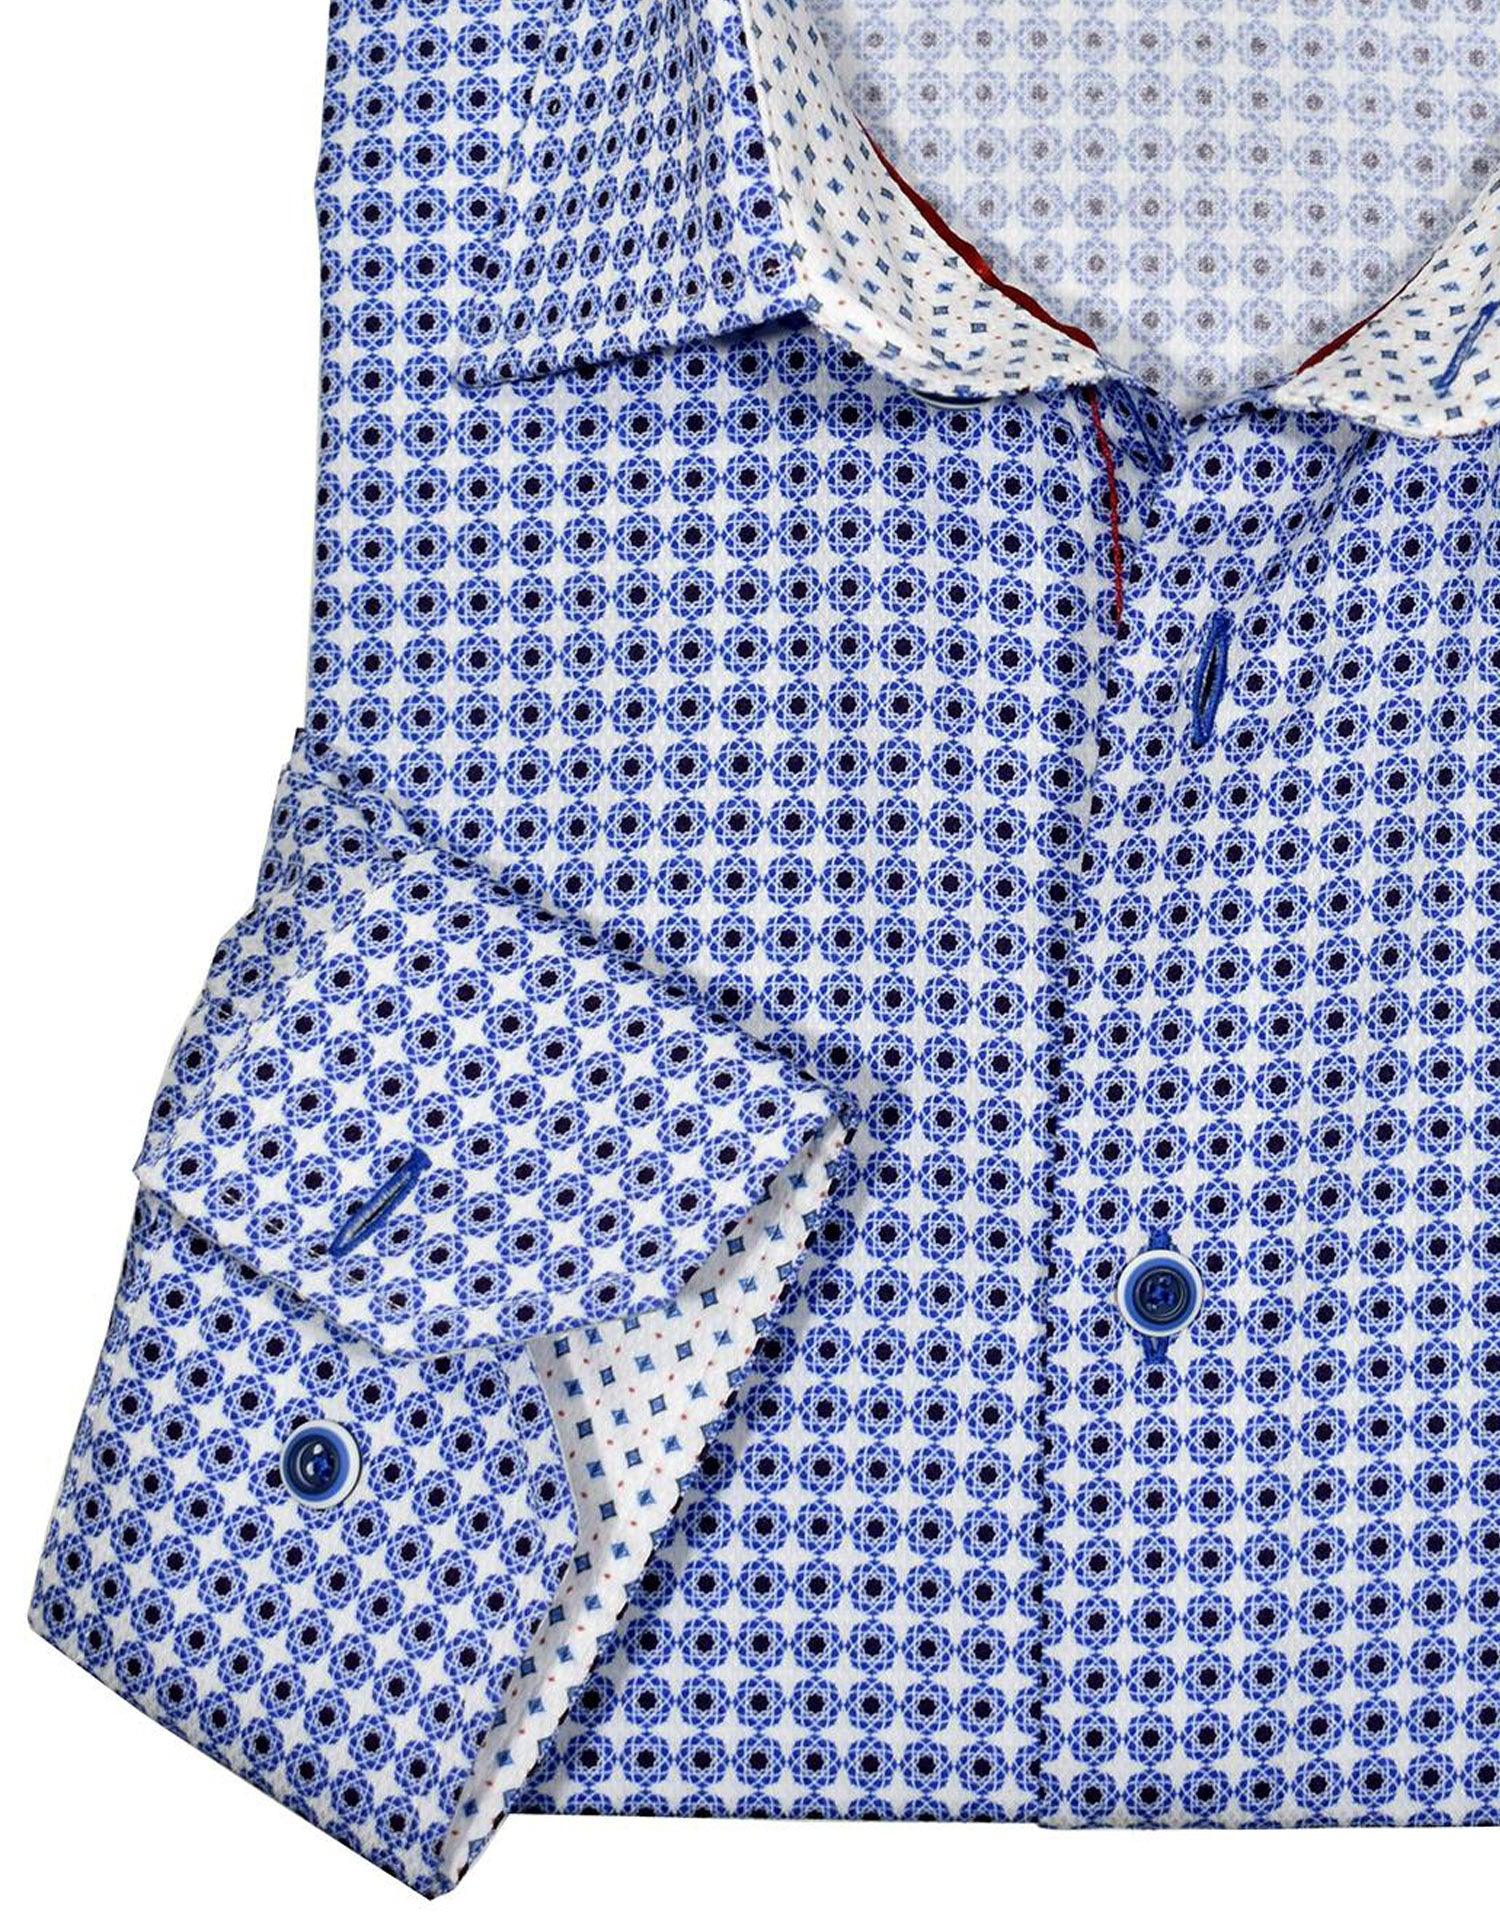 Exclusive 1 Piece Roll Collar.  The one piece collar looks exceptional on and will quickly become your favorite shirt.  Fine cotton textured fabric. Soft textured fabric feels like fine cotton & silk. Rich, elegant neat pattern in blue and navy. Custom selected buttons. 2 button signature cuffs. Classic shaped fit.